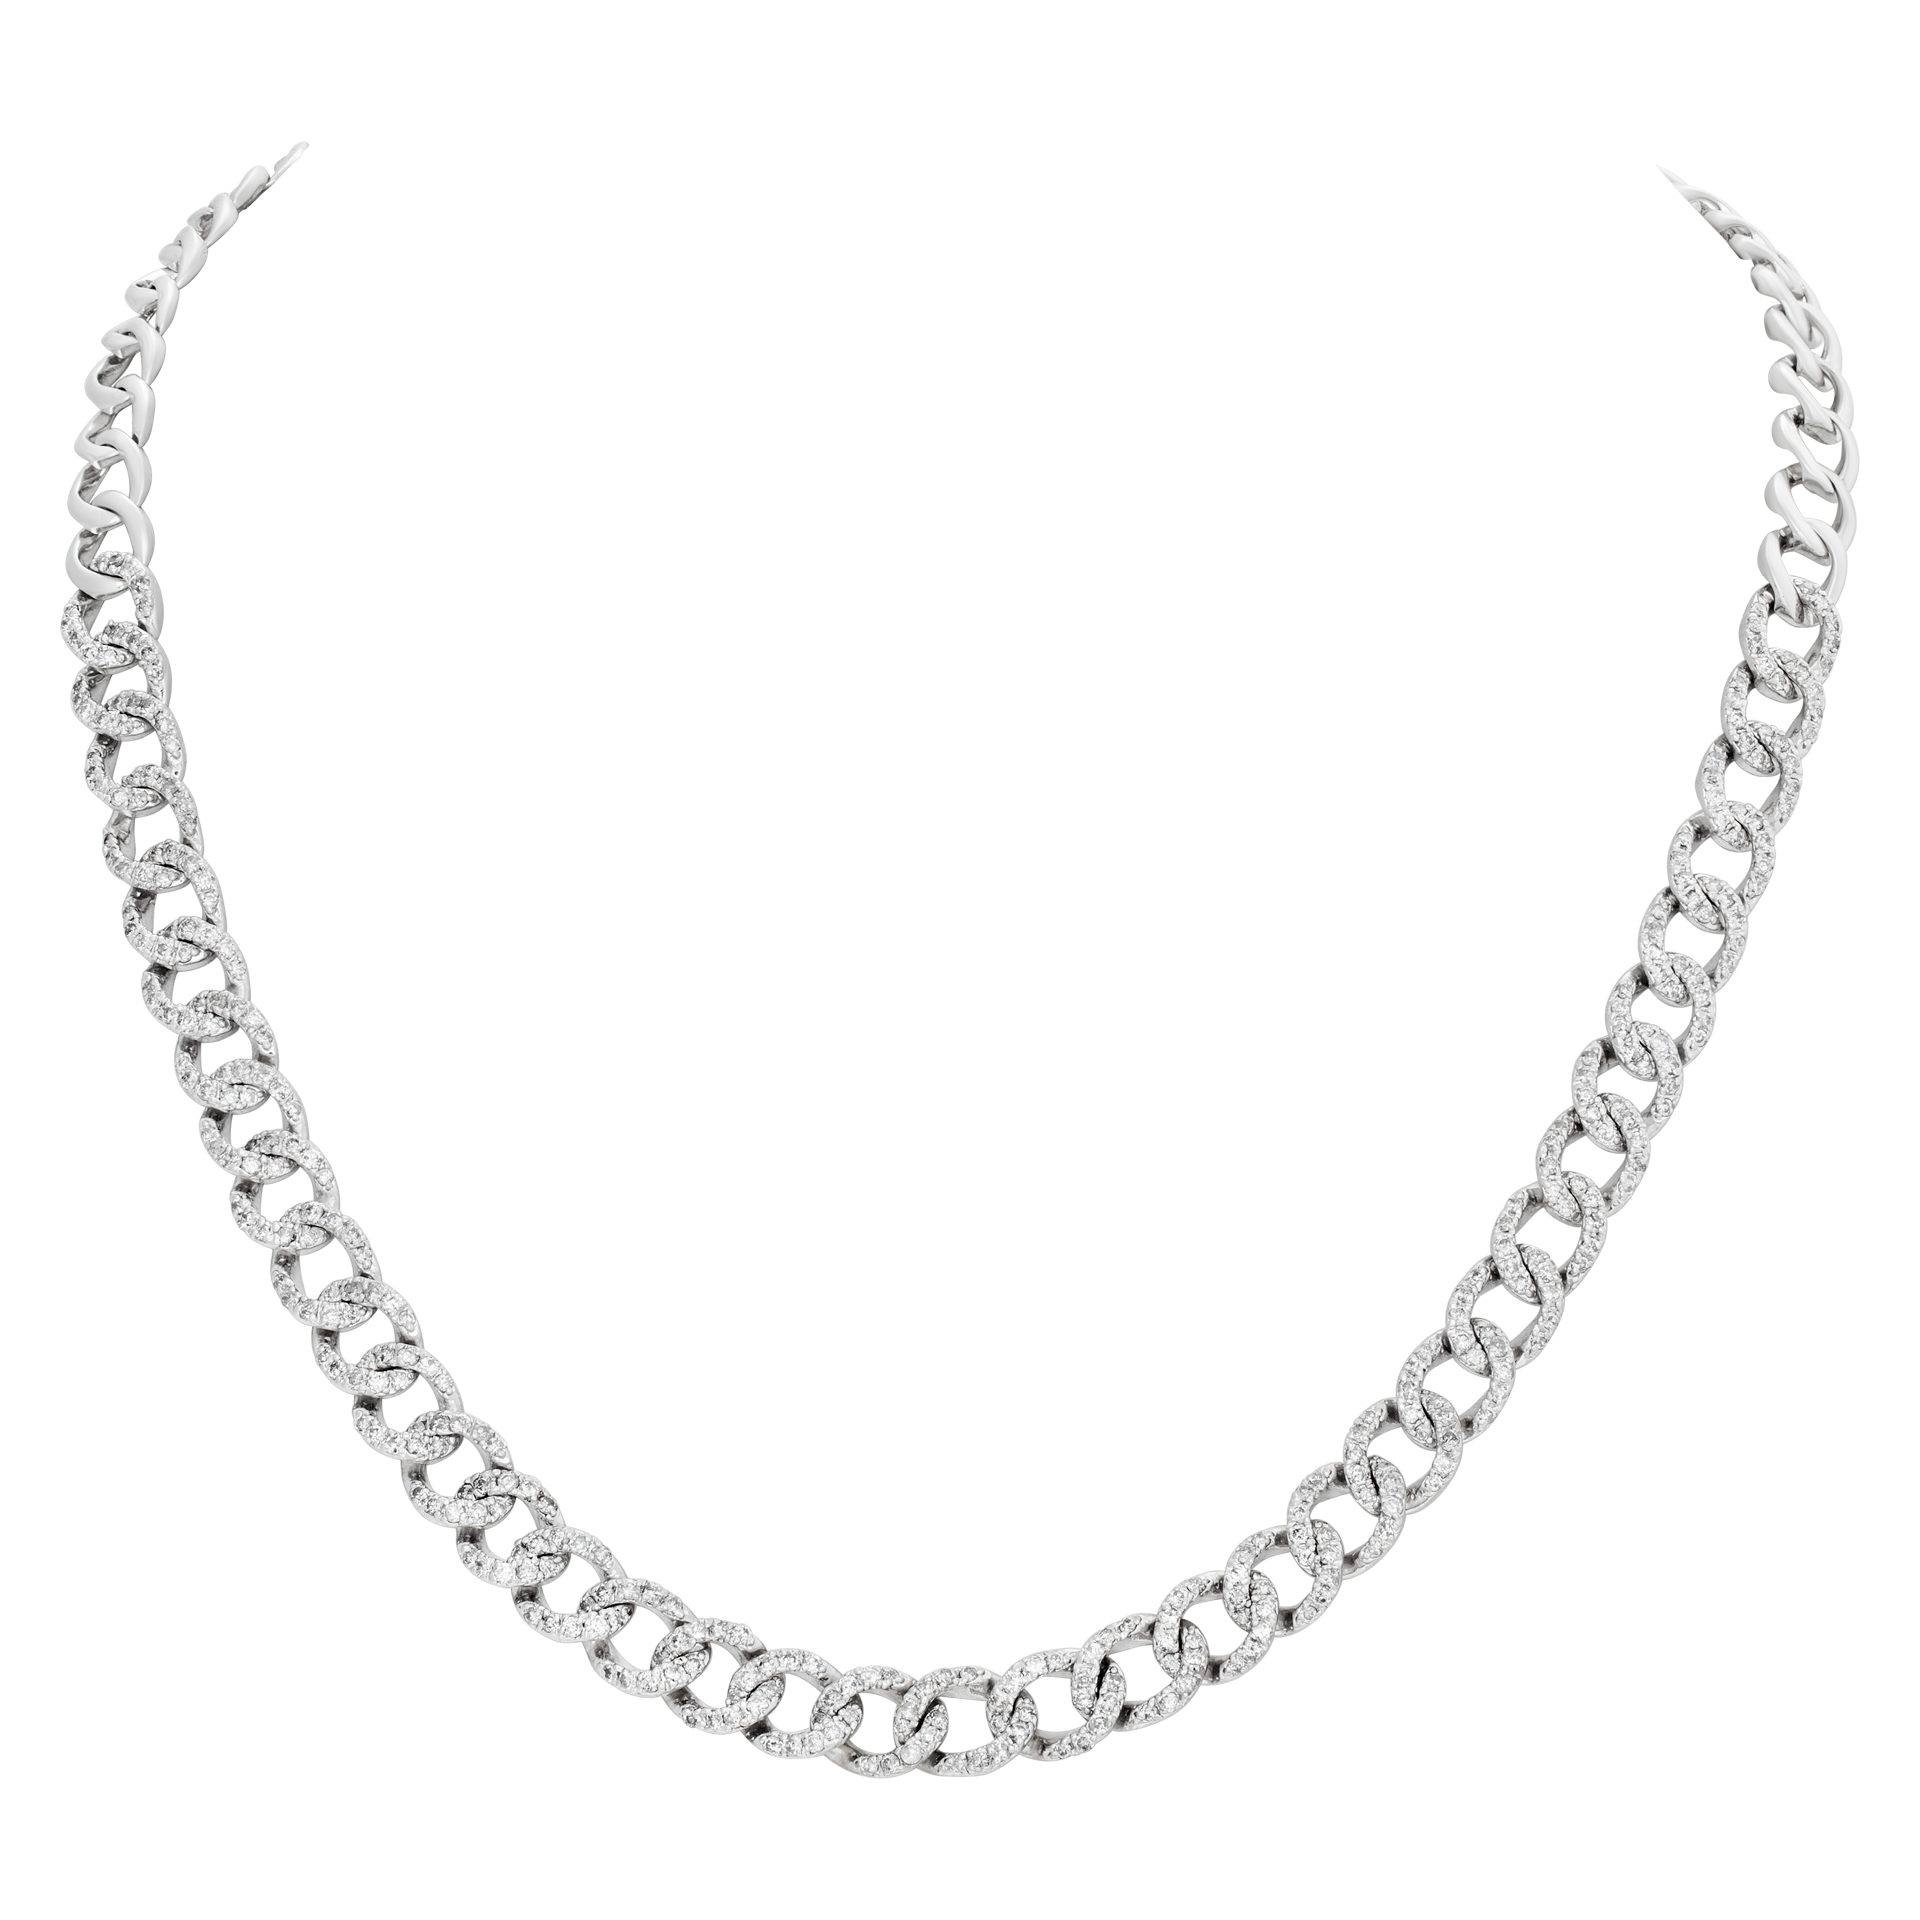 Curb Link Pave Diamond Necklace In 18k White Gold, 17" Complete Pave Diamonds Totaling 2 Carats